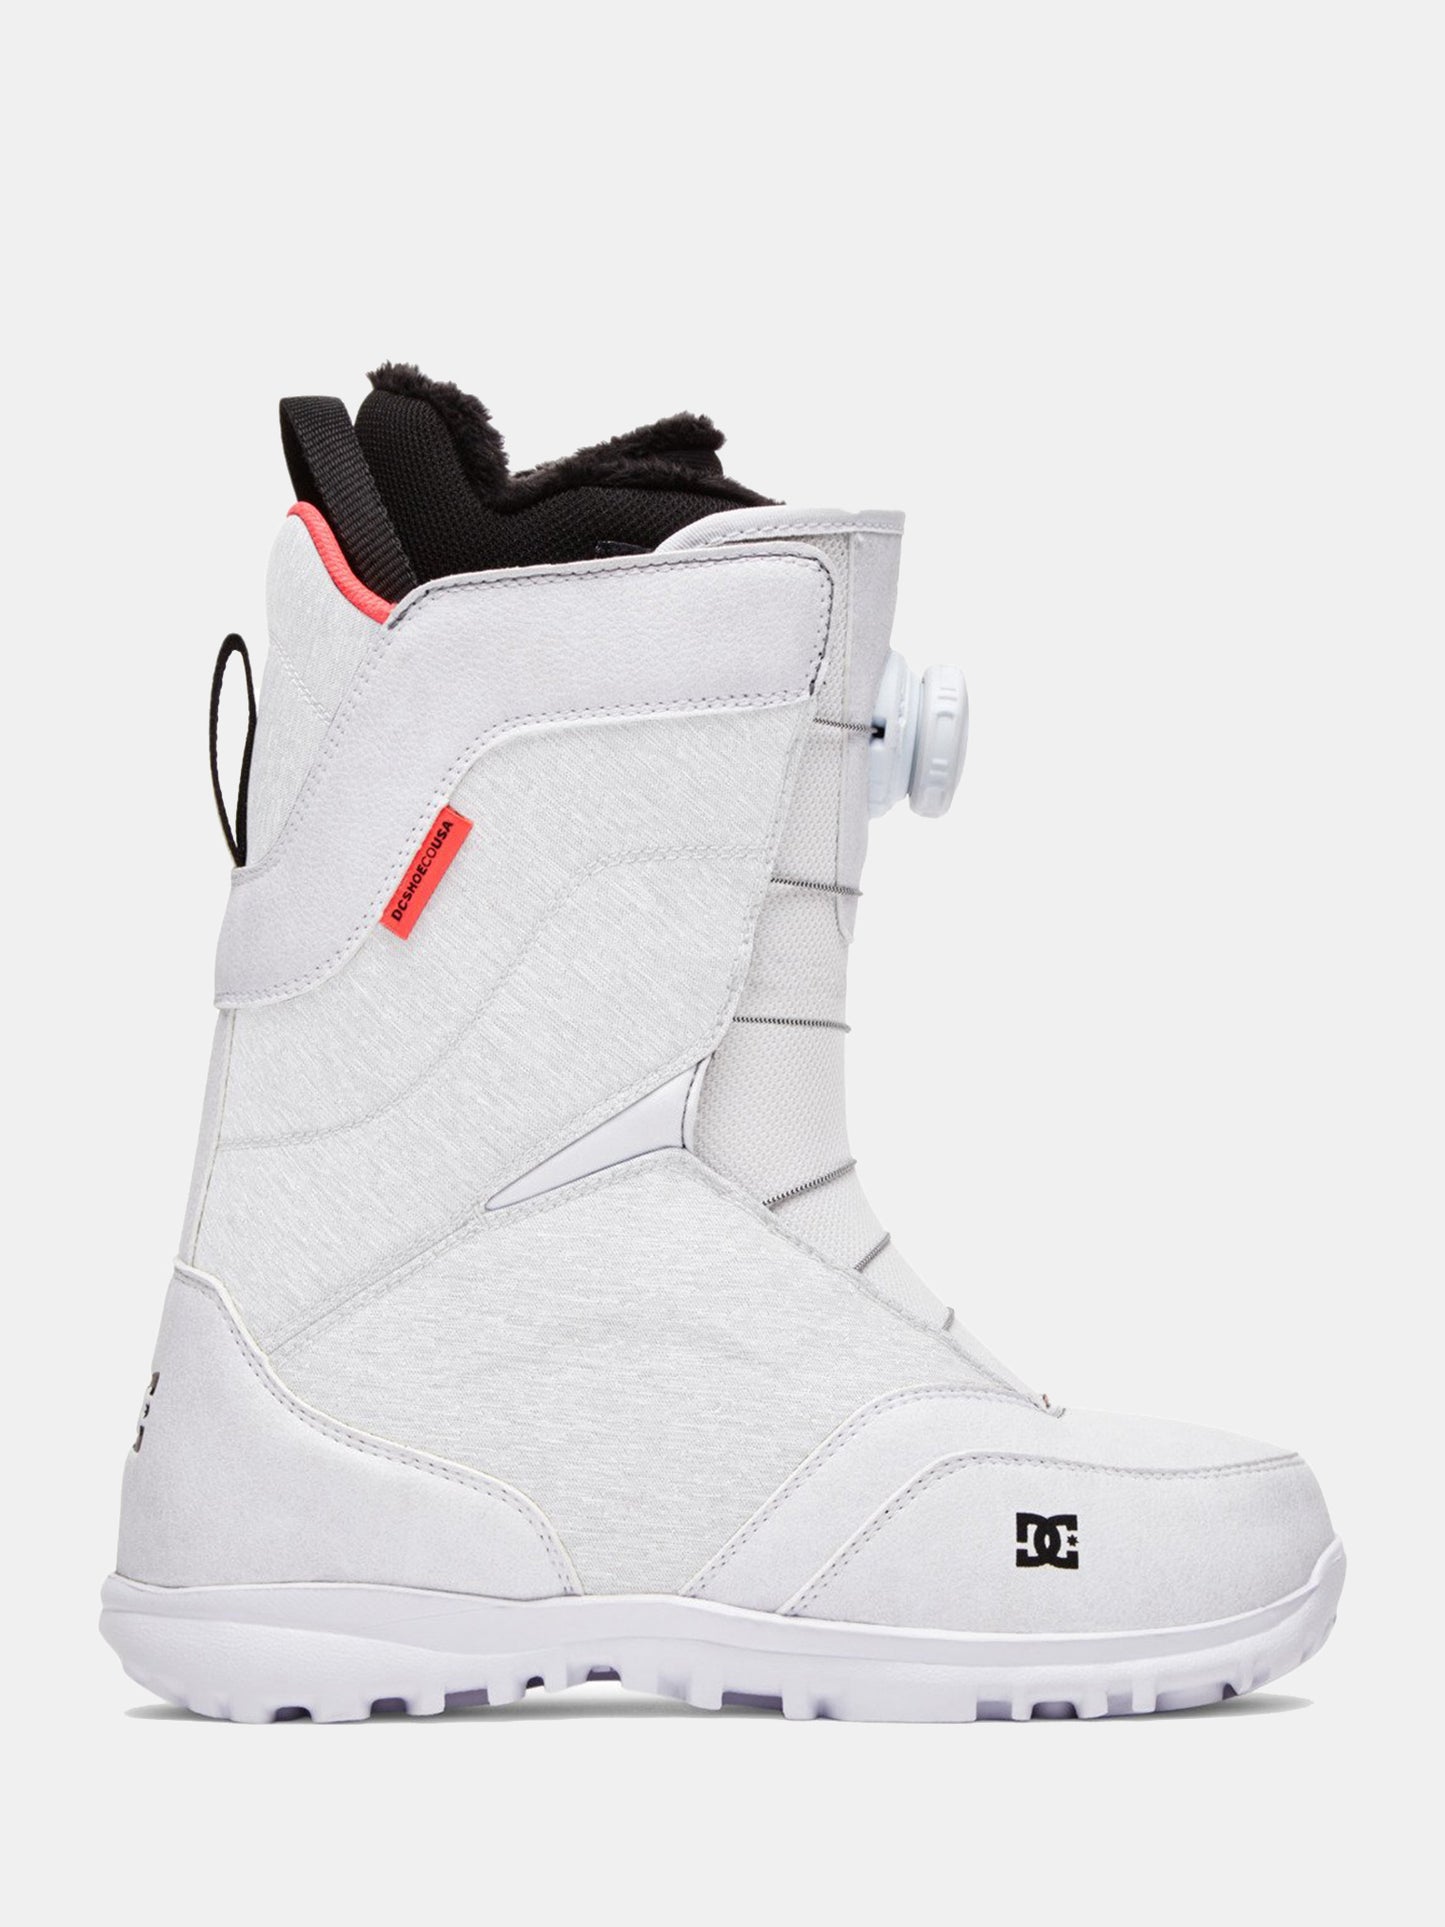 DC Women's Search Snowboard Boots 2021